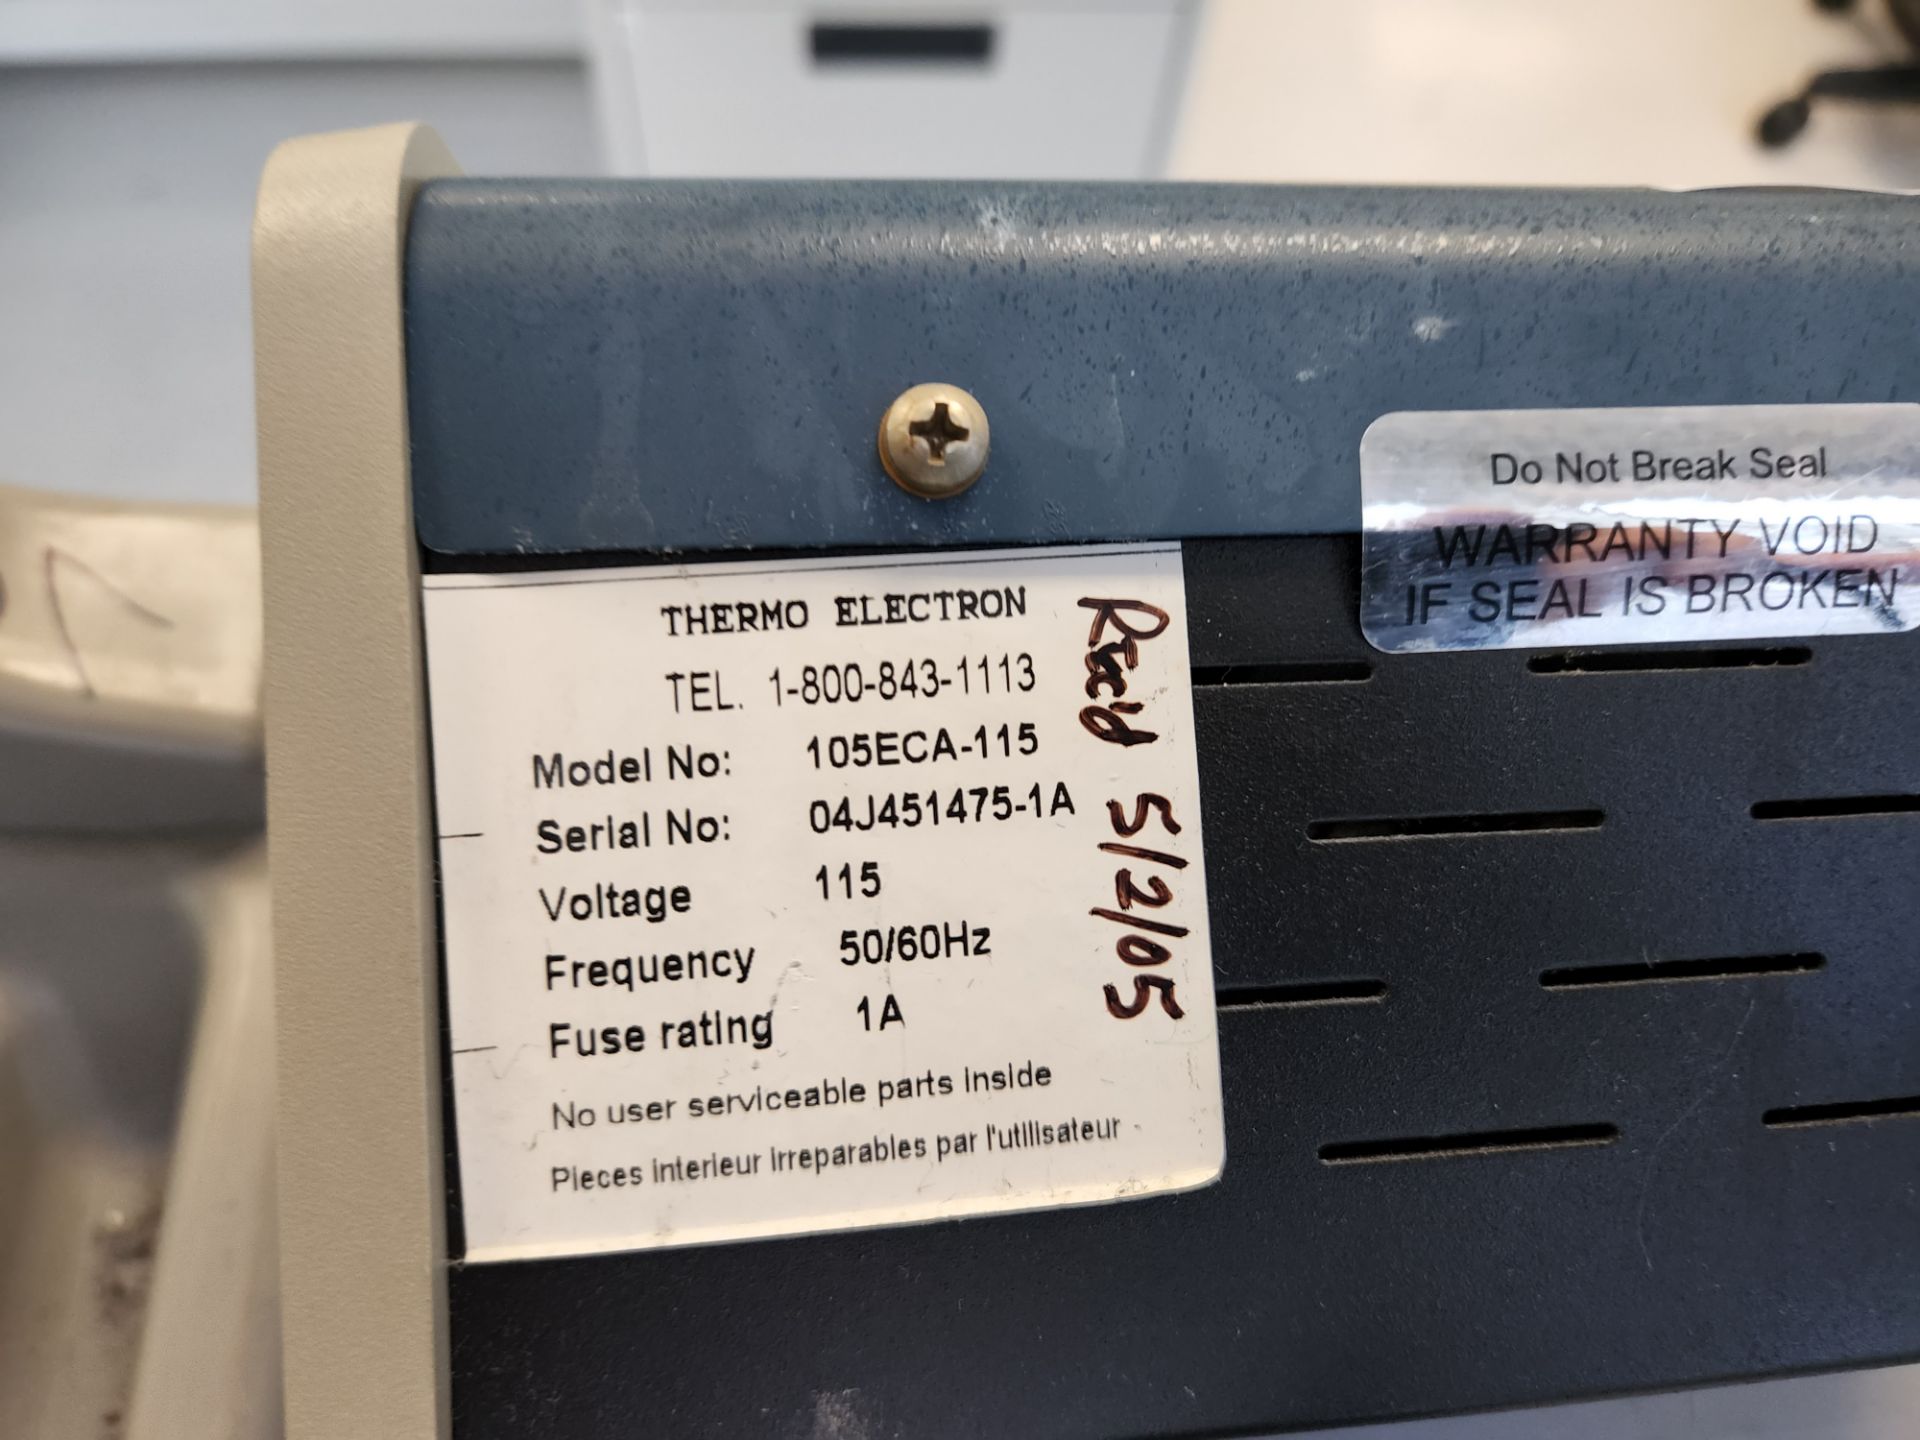 Thermo Electron Corporation Model Ec105 Electrophoresis With (1) Fisherbrand Model Fb-Sb-2025 - Image 3 of 4